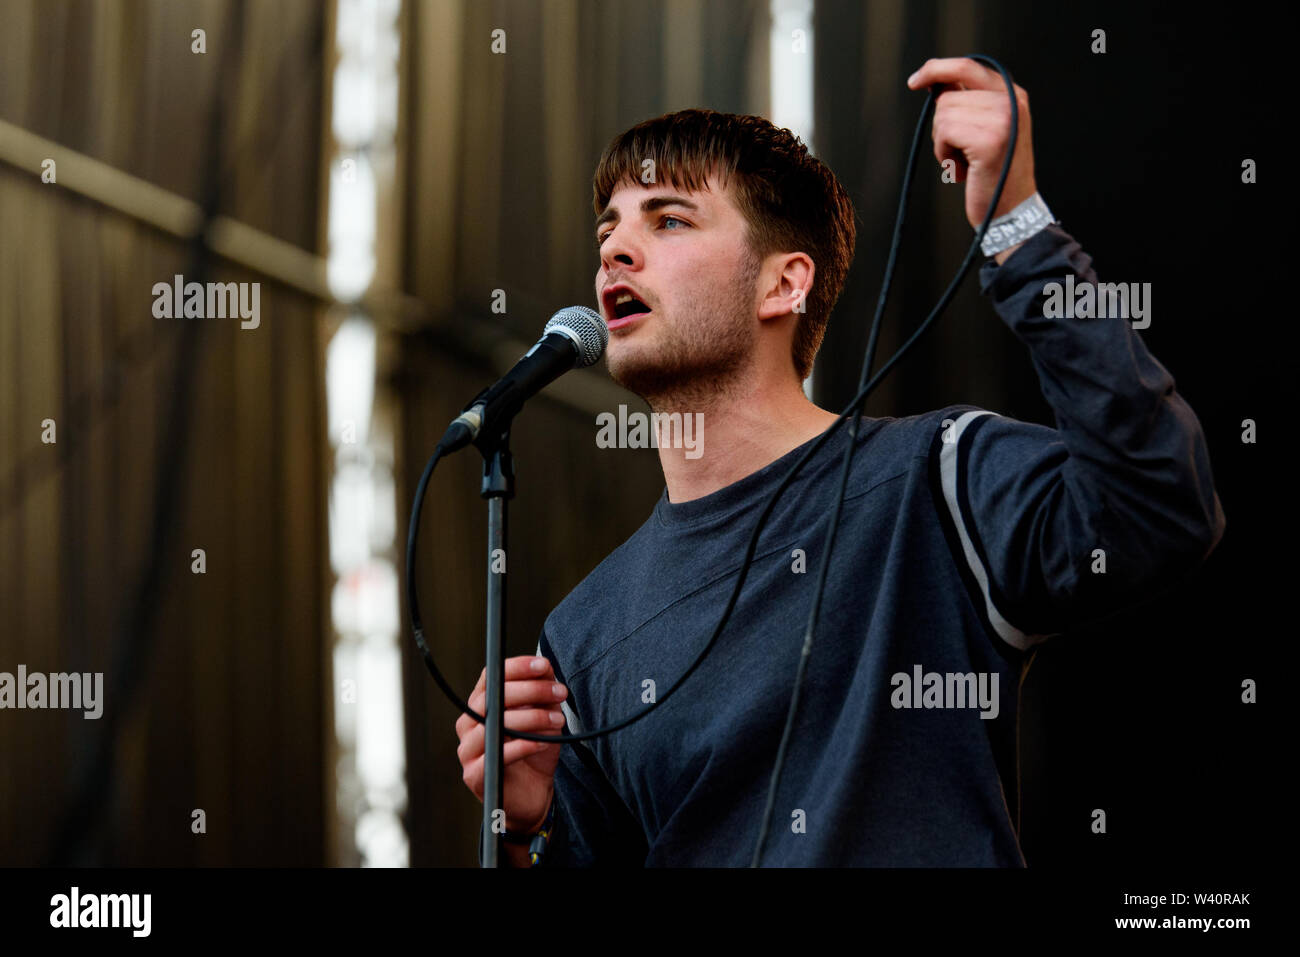 Benicassim, Spain. 18th July, 2019. Fontaines D.C. (band) perform in concert at FIB 2019 Festival on July 18, 2019 in Benicassim, Spain. Credit: Christian Bertrand/Alamy Live News Stock Photo